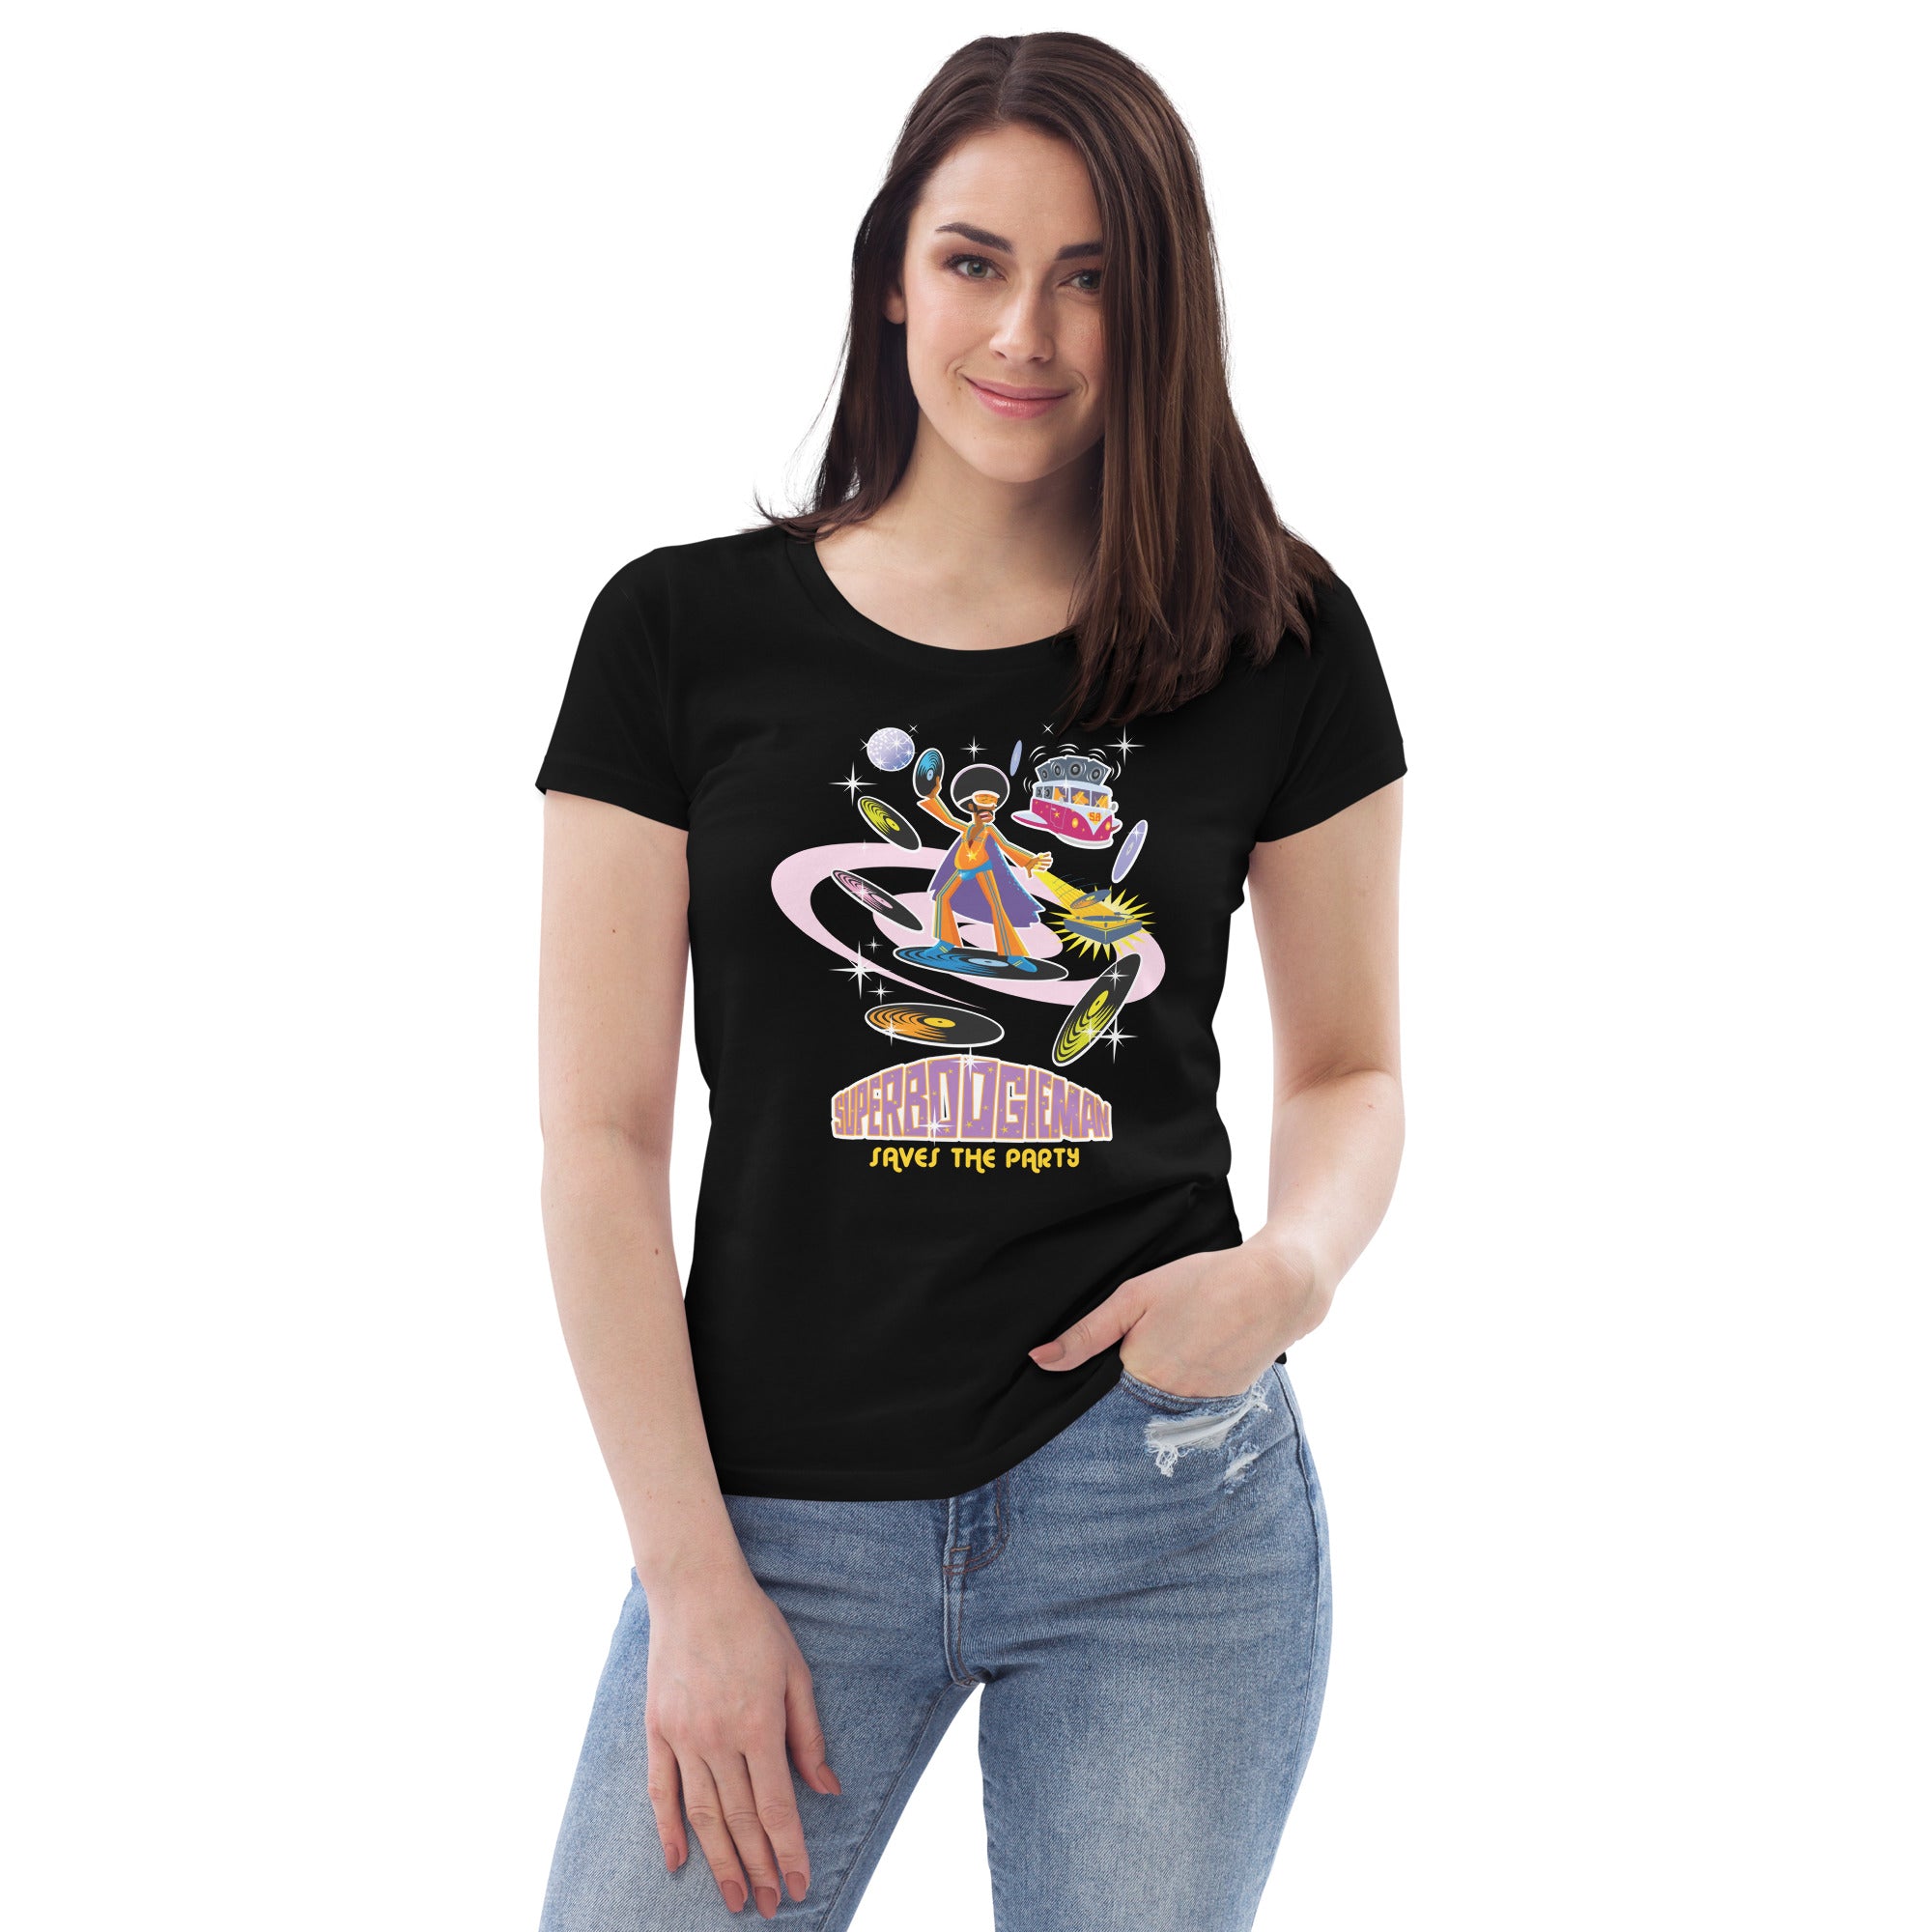 Women's fitted eco tee Superboogieman saves the party